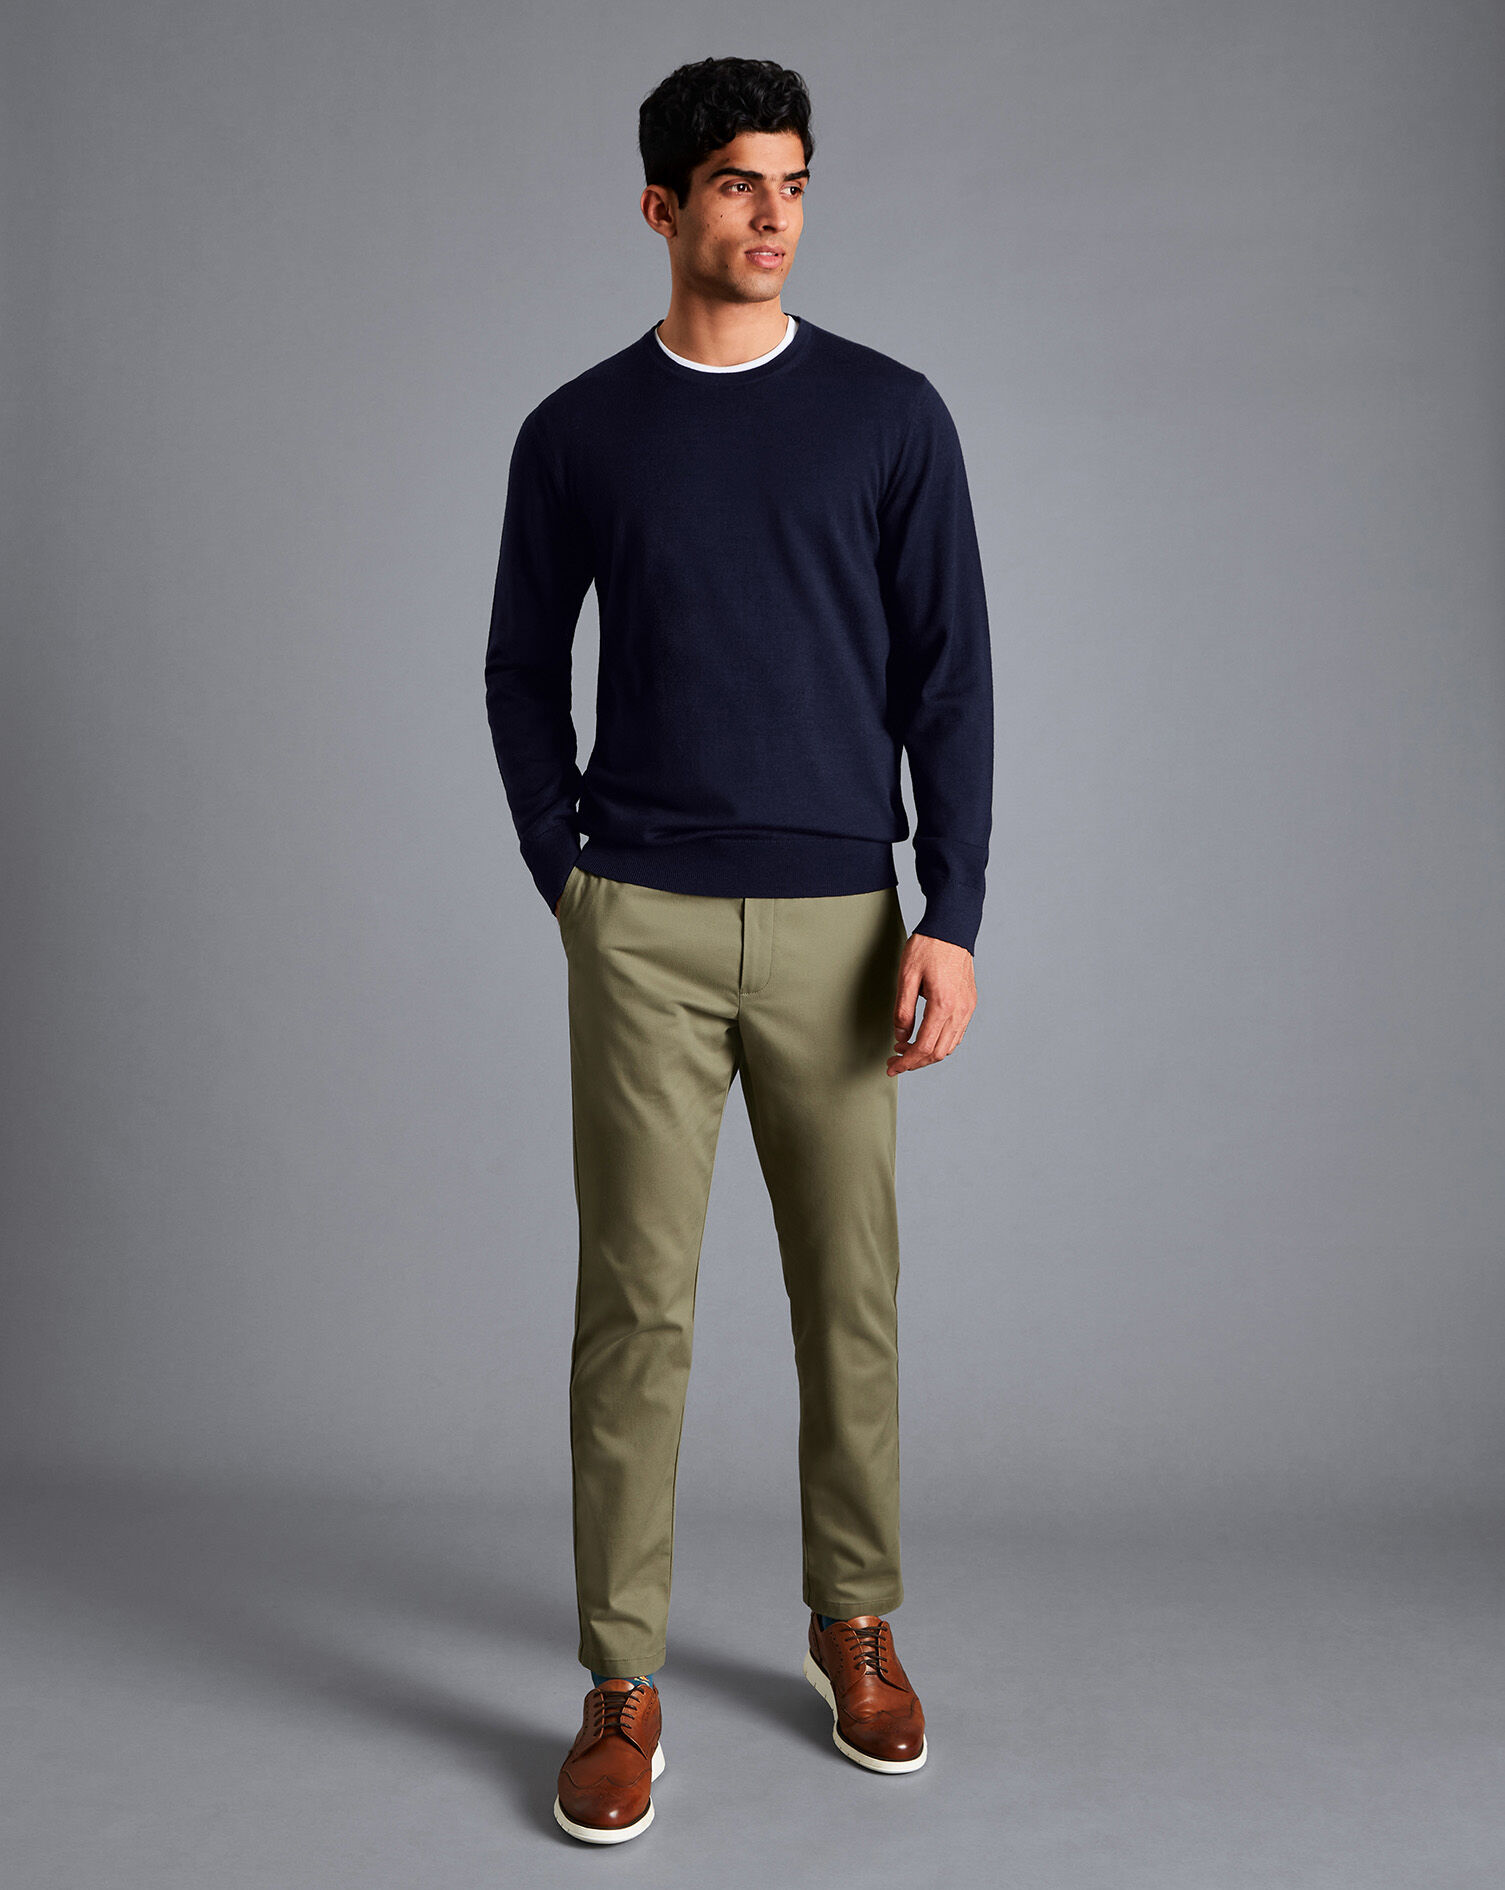 15 Types Of Pants - The Trouser Style Guide EVERY Man Needs